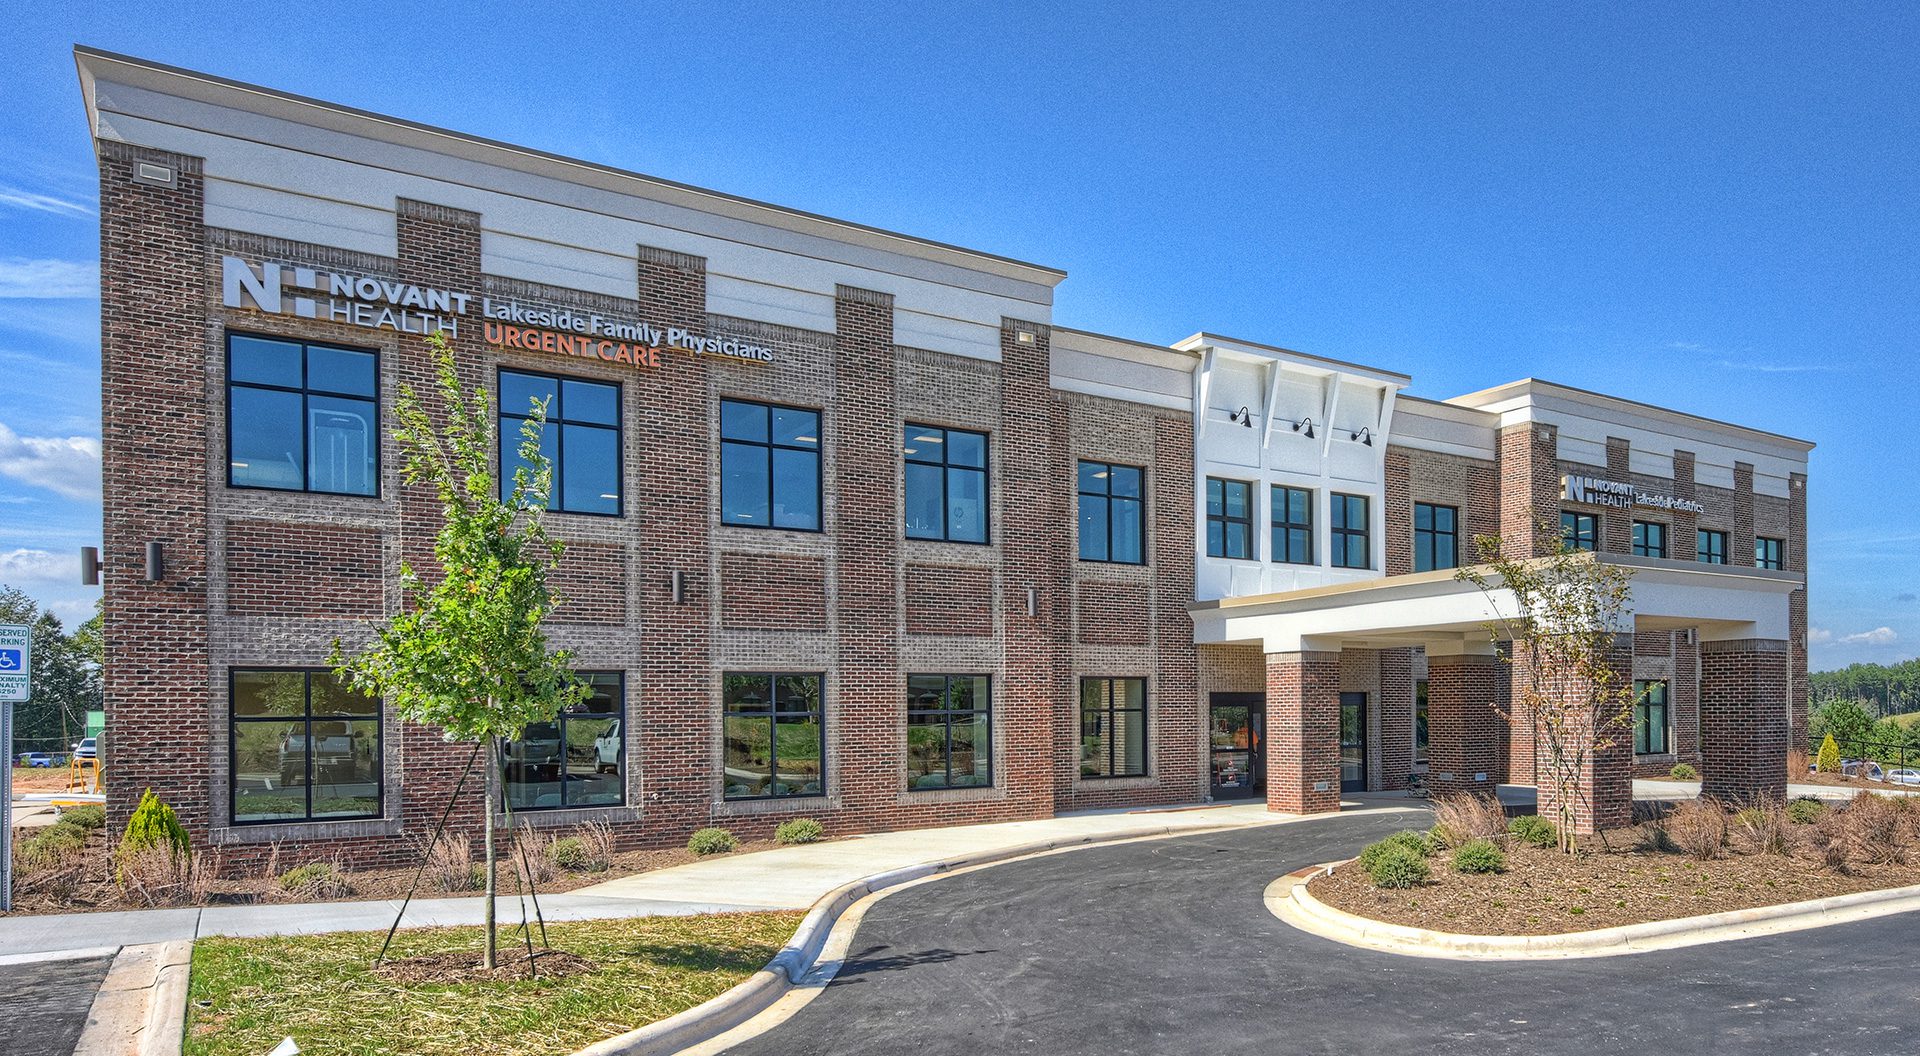 Novant Health 2-story brick MOB medical office building on a sunny day with a covered drive thru awning entrance